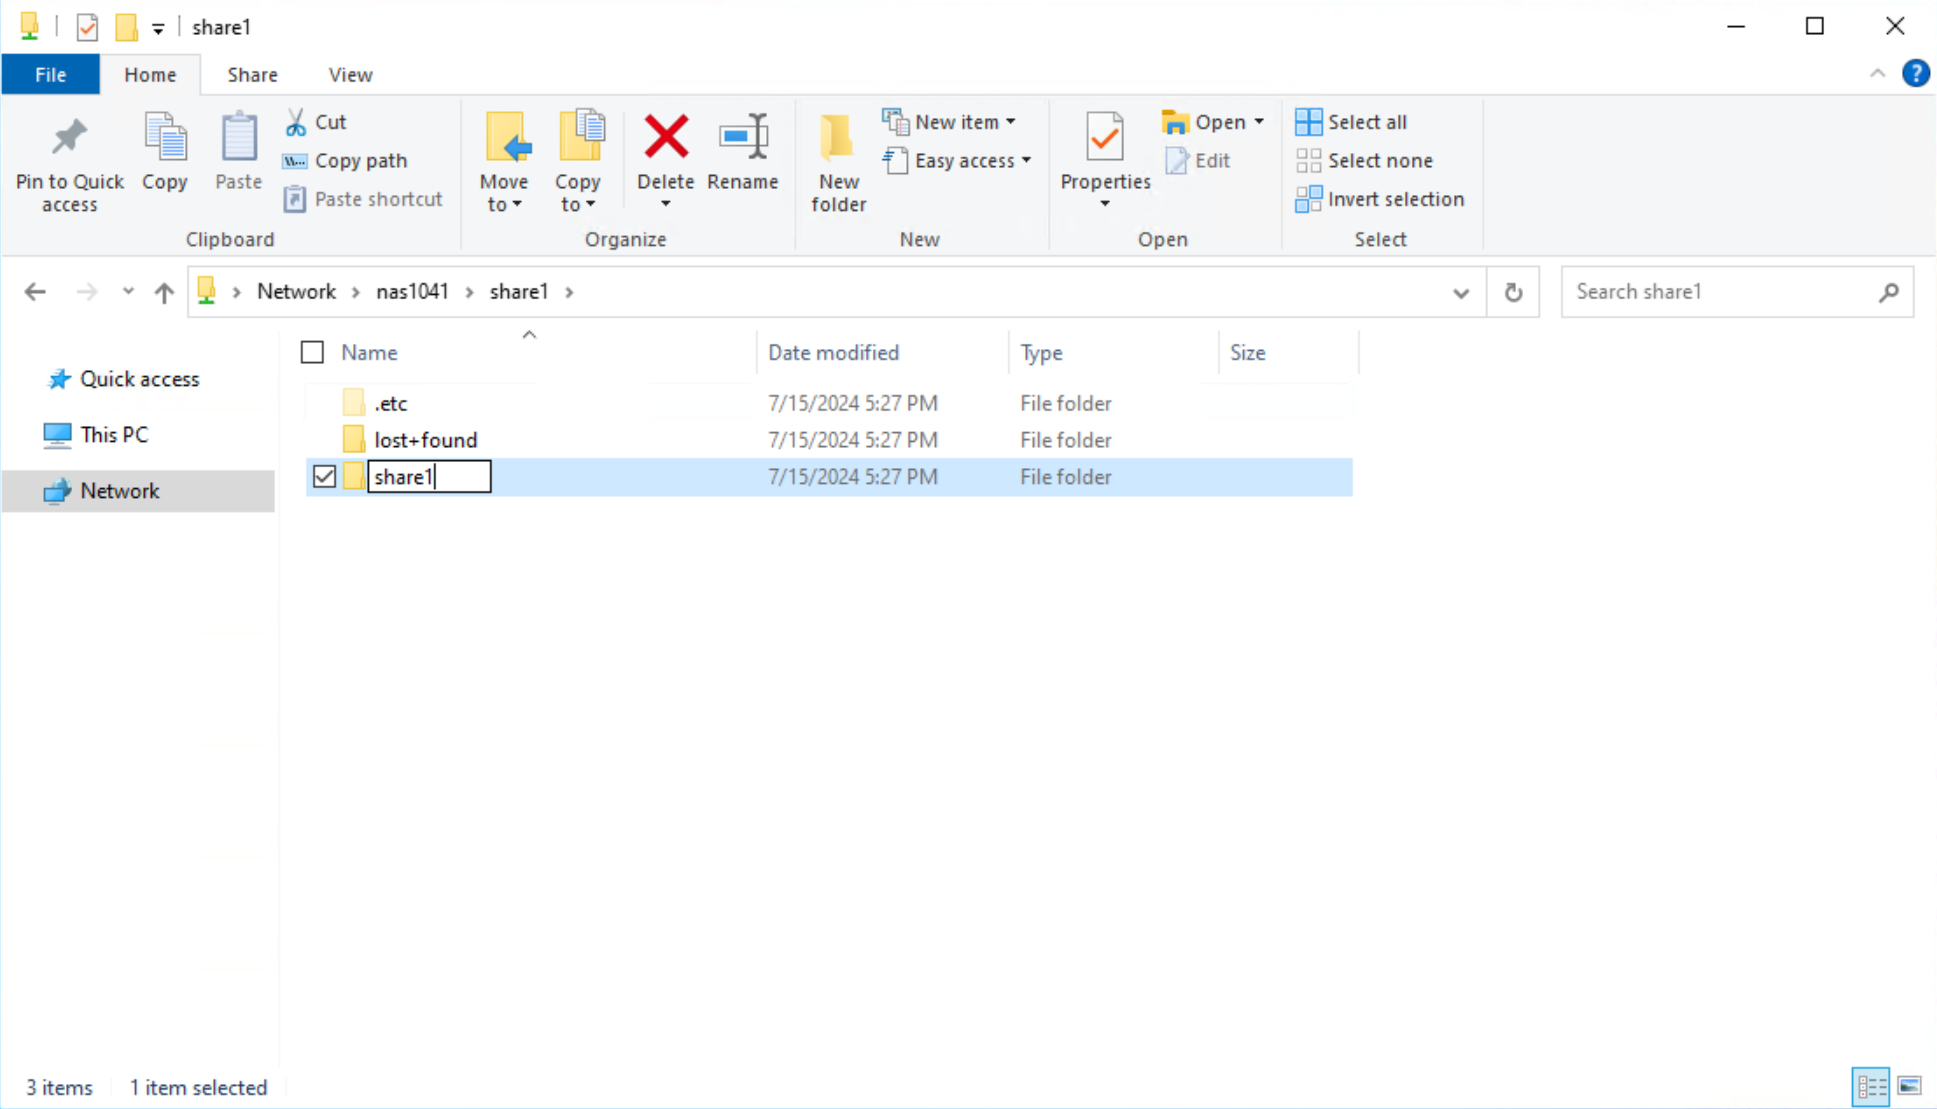 A screenshot showing the creation of the a subdirectory under the root of the file system on an SMB share.